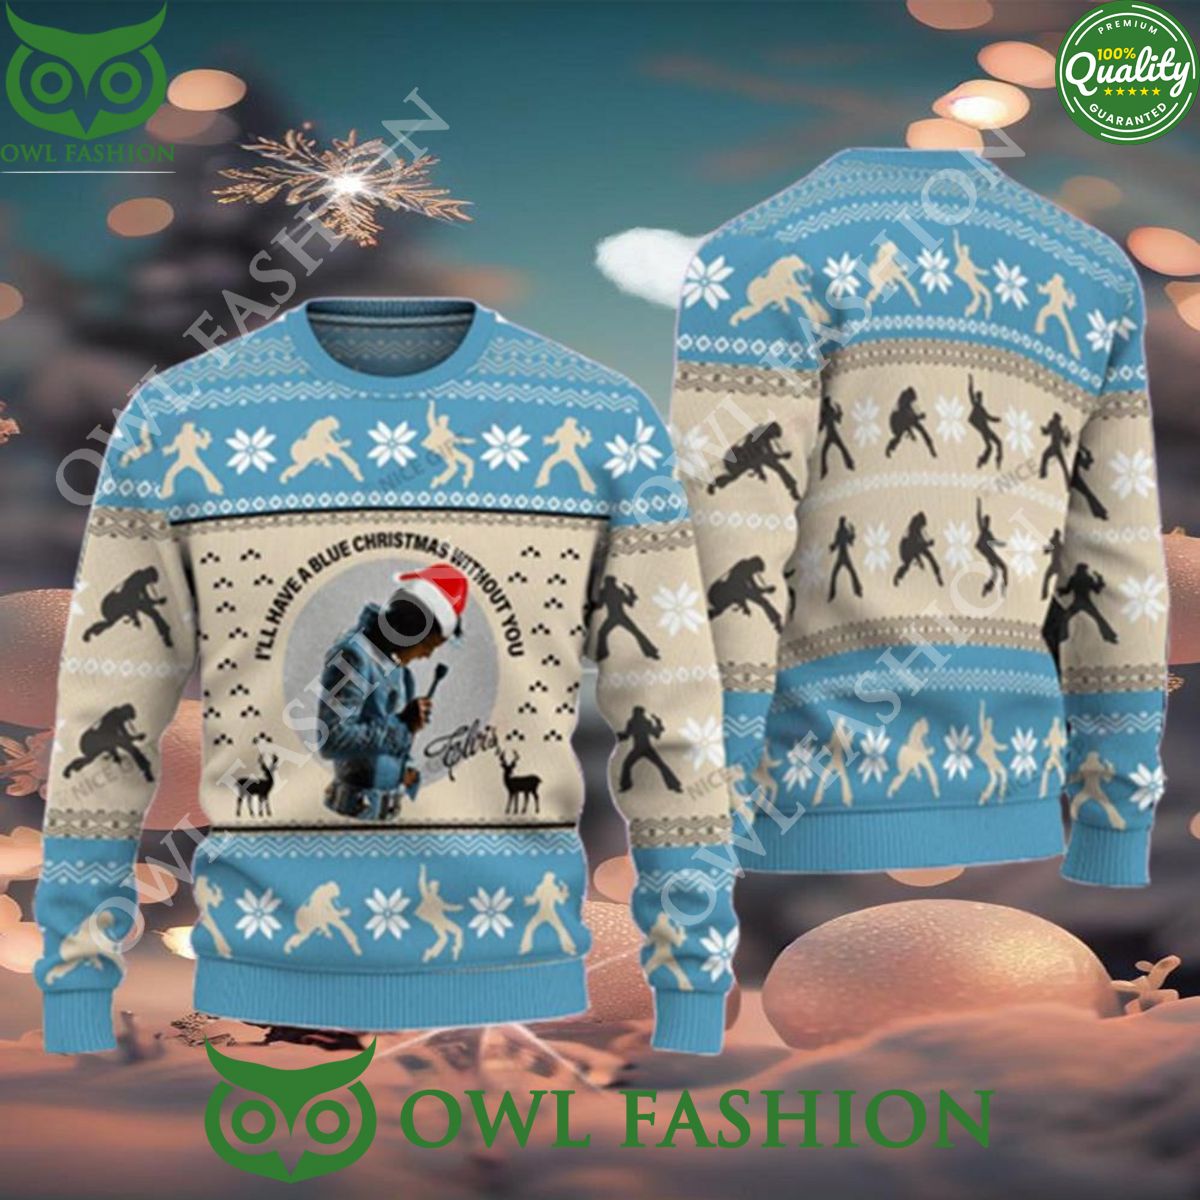 elvis presley ill have a blue ugly christmas without you sweater 1 feWAm.jpg